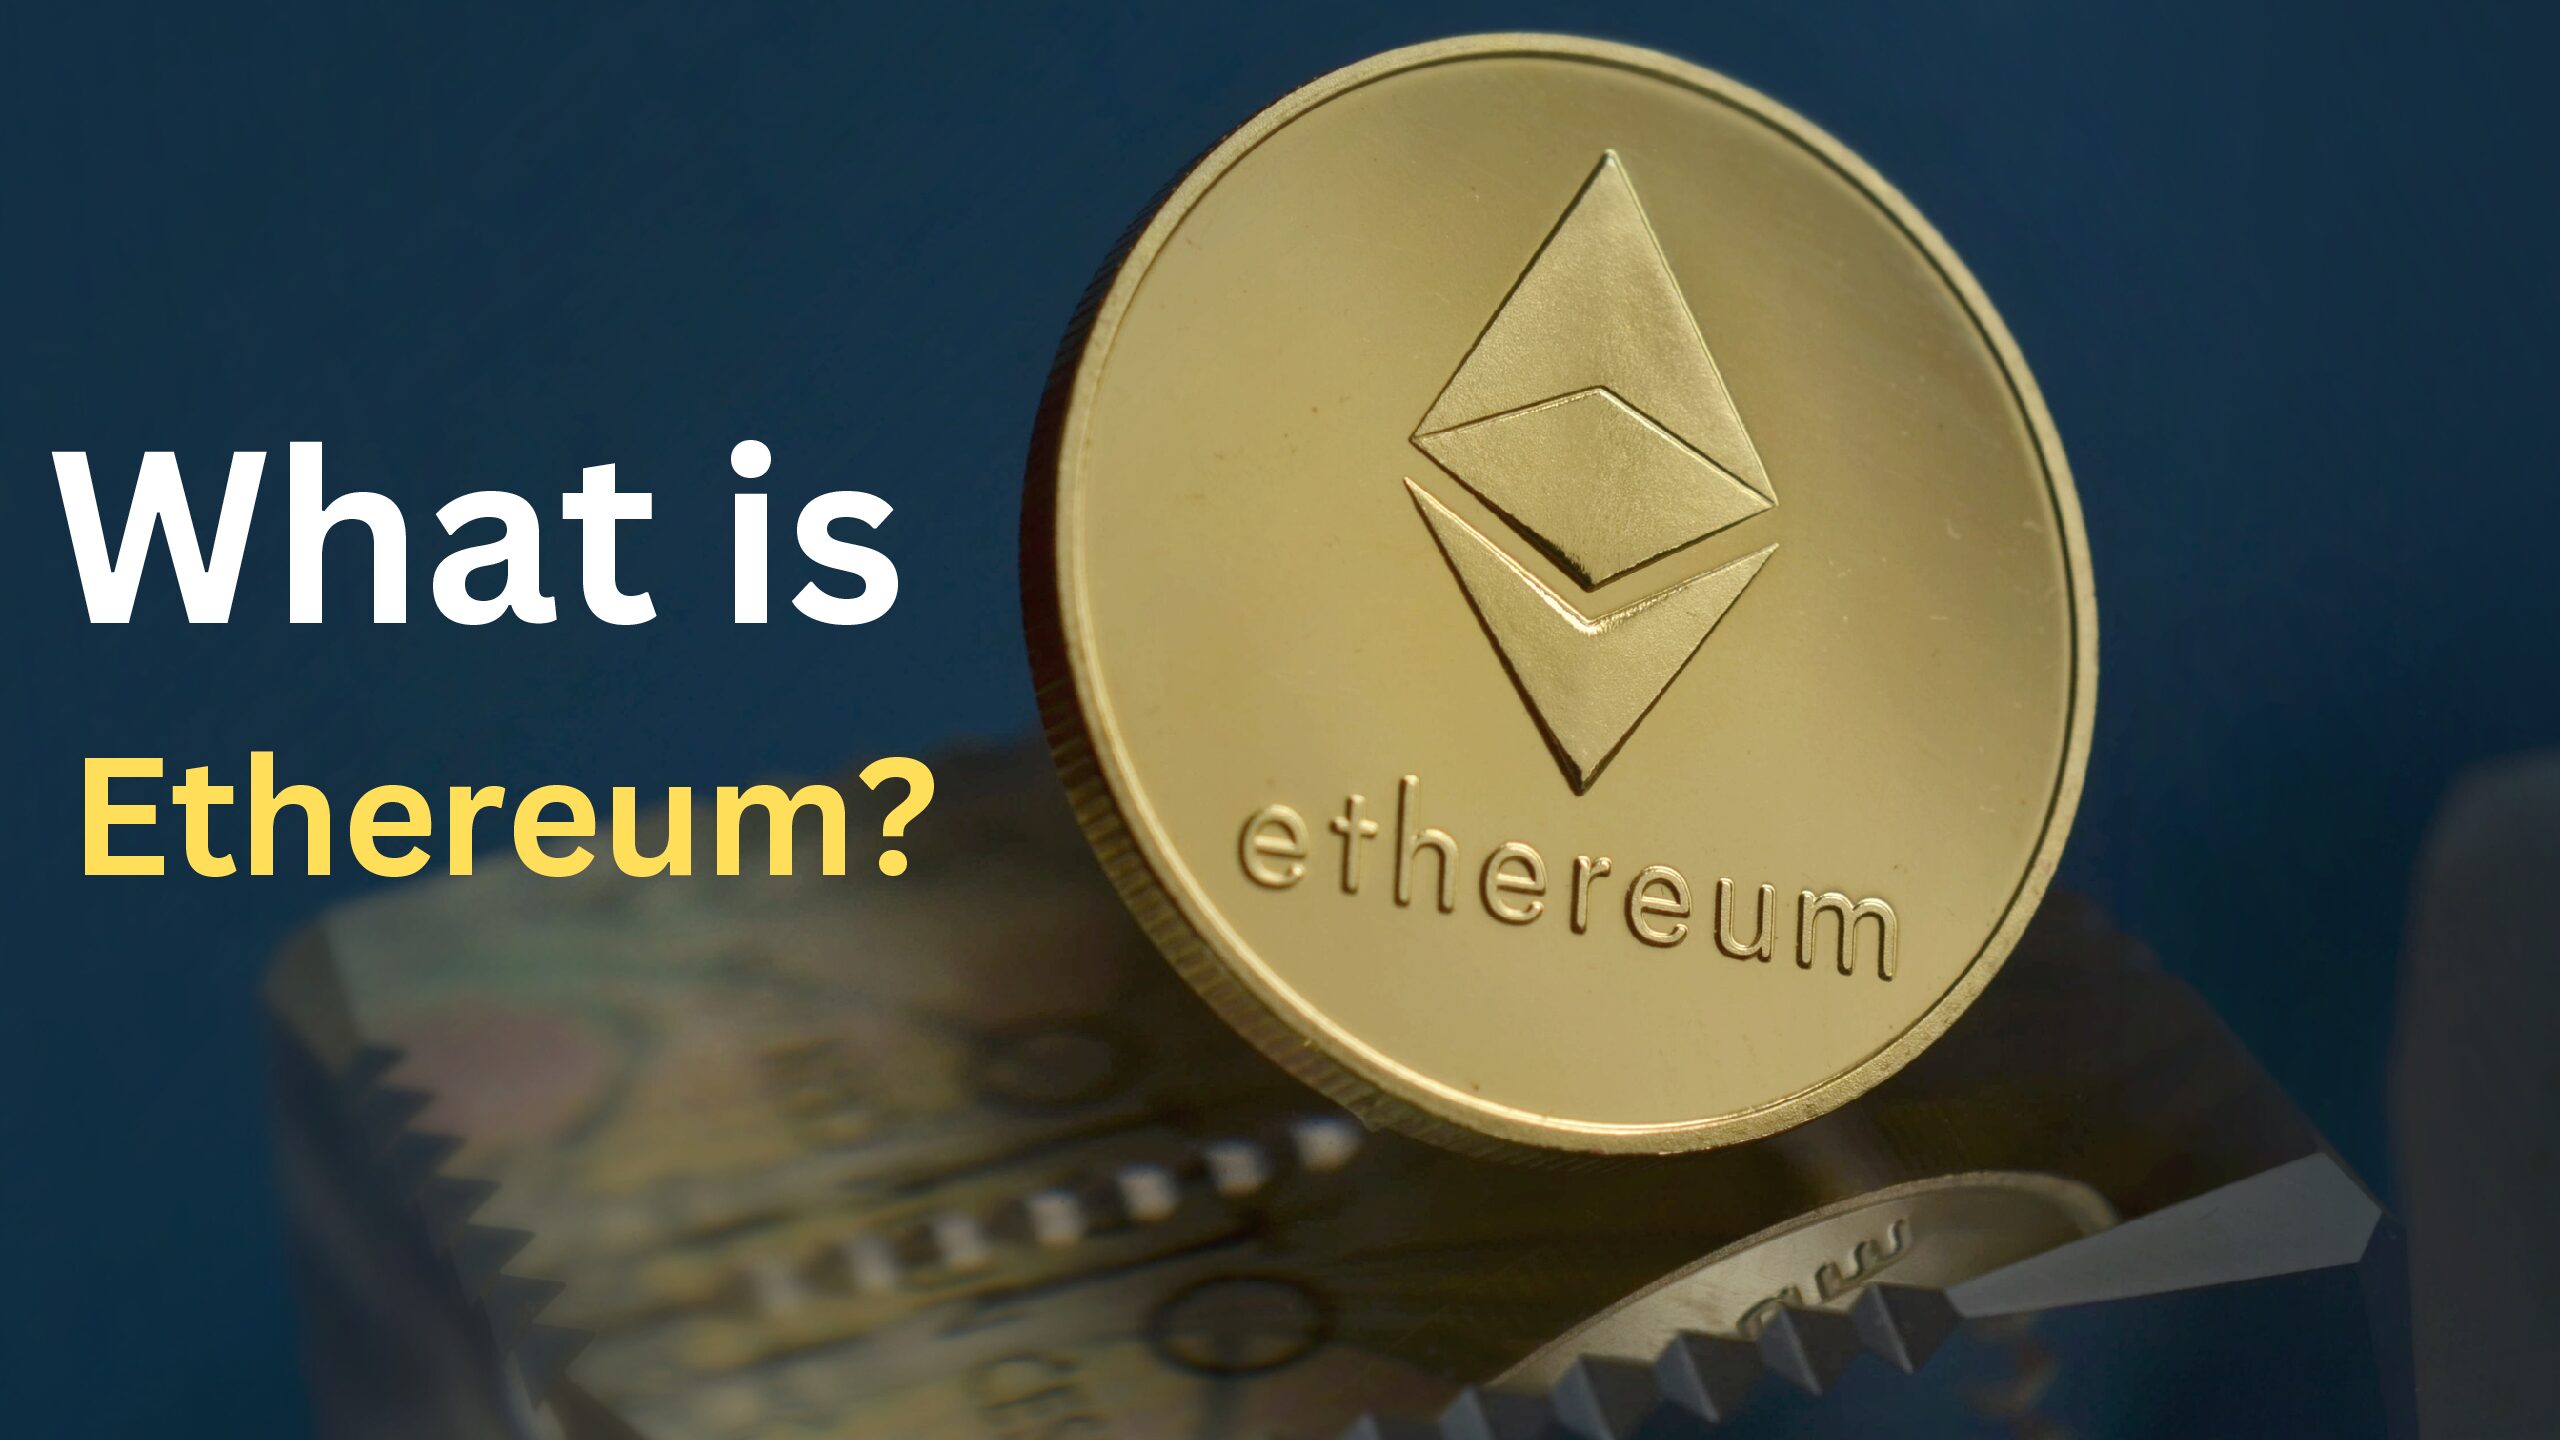 What is Ethereum? Look no further! Here’s everything you need to know in one place.